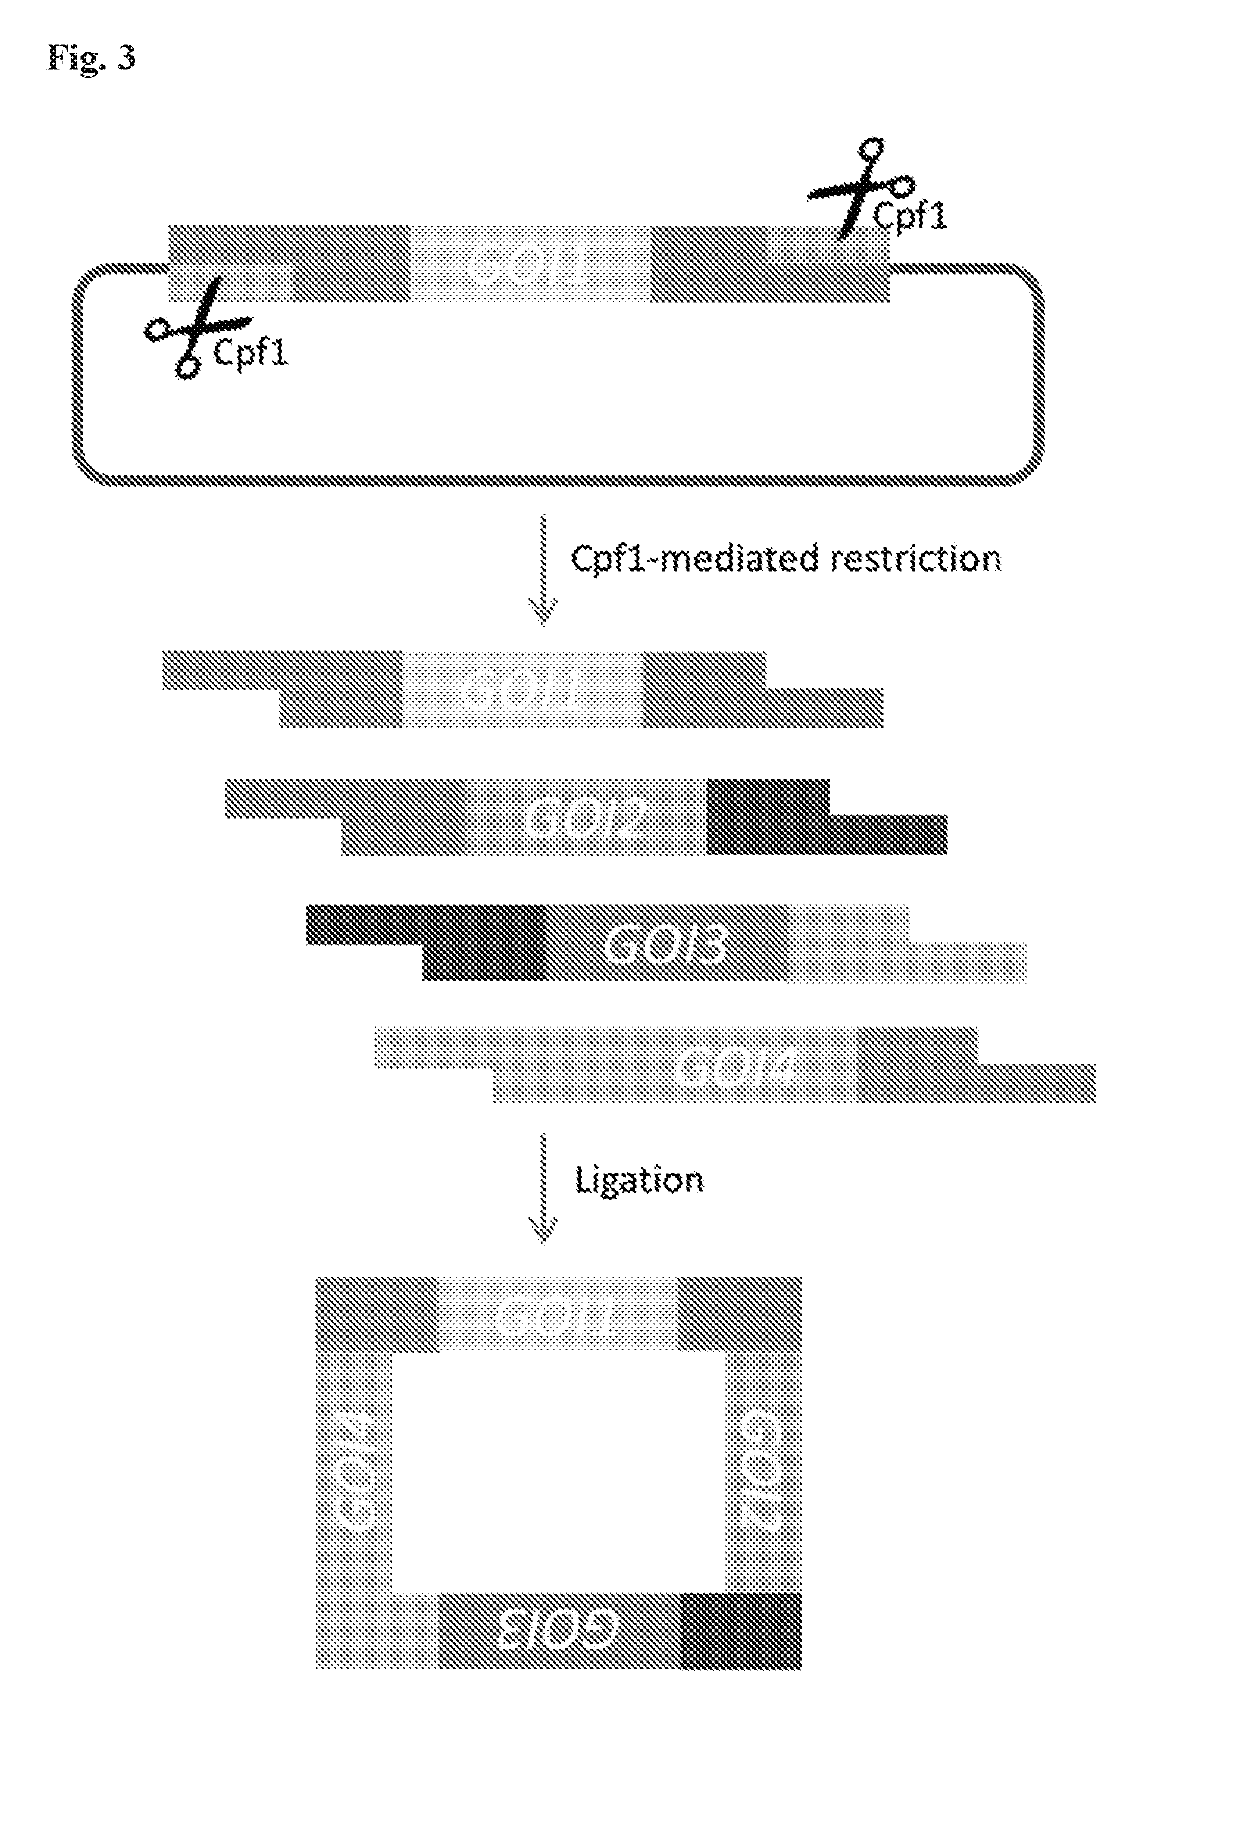 Scarless DNA assembly and genome editing using crispr/cpf1 and DNA ligase